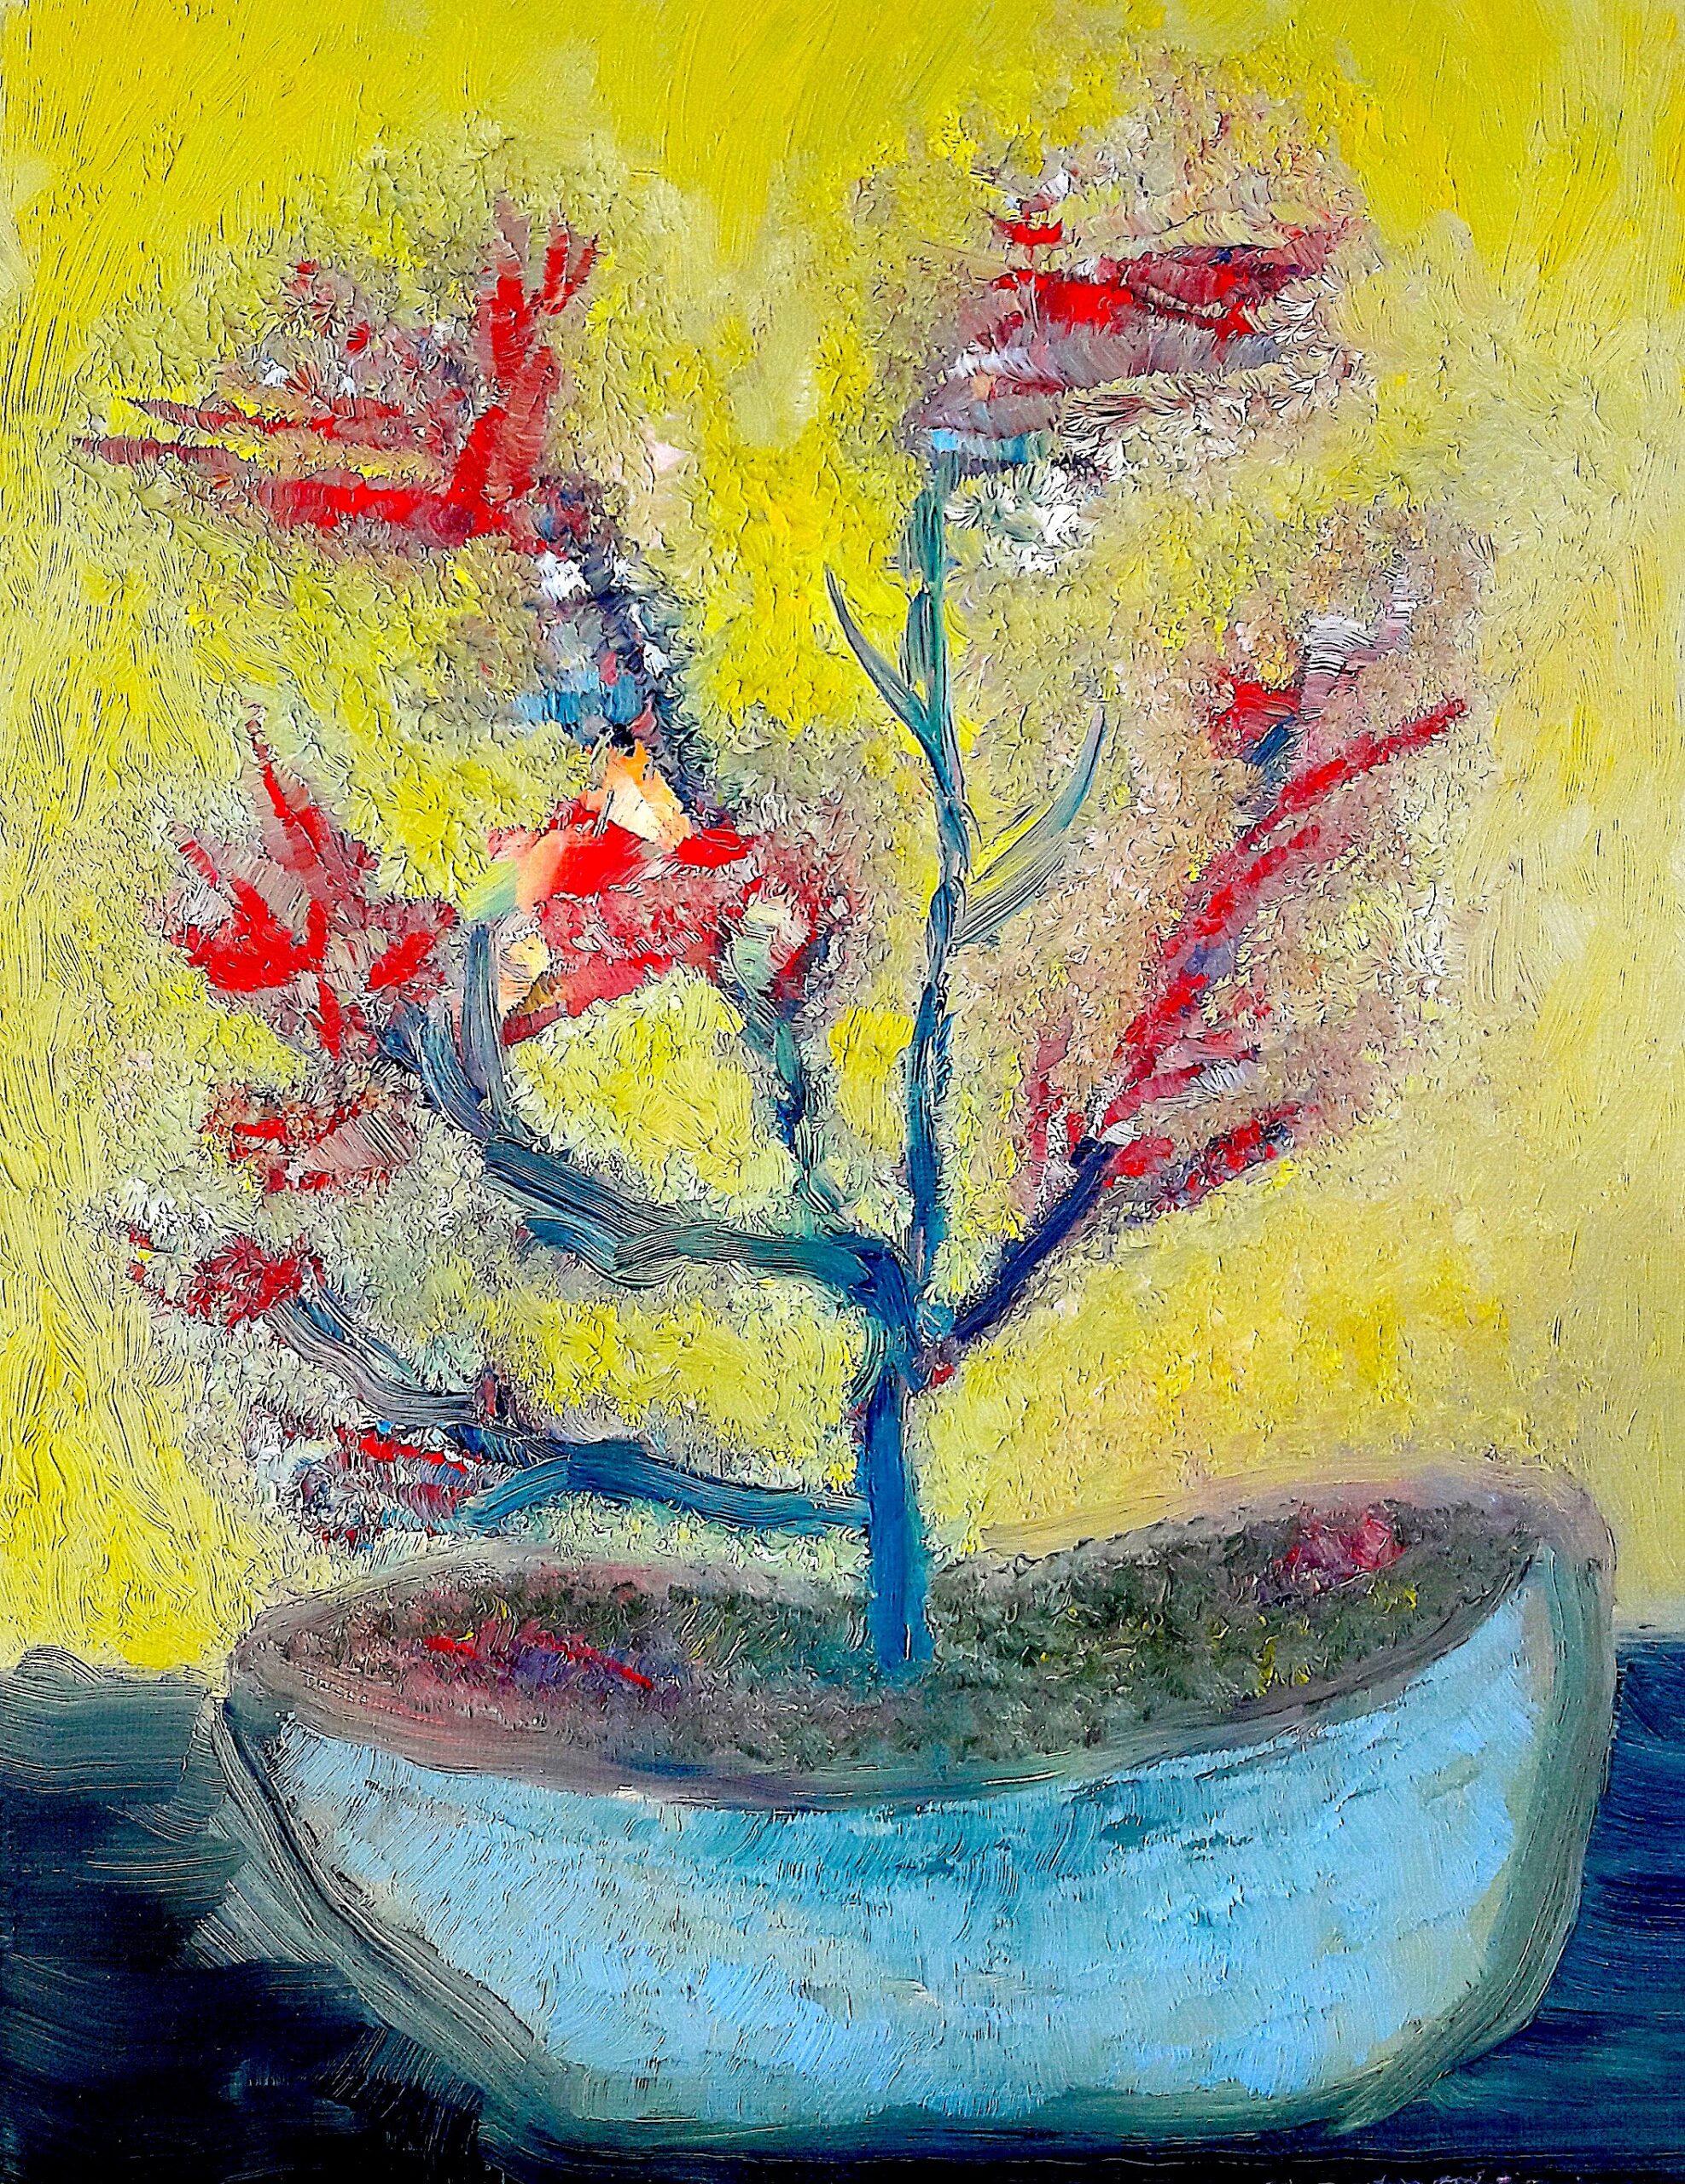 painting of a unique red flower on a yellow background, as a tribute to Vincent Van Gogh, by Samuel Rondiere a.k.a. Sam Elka